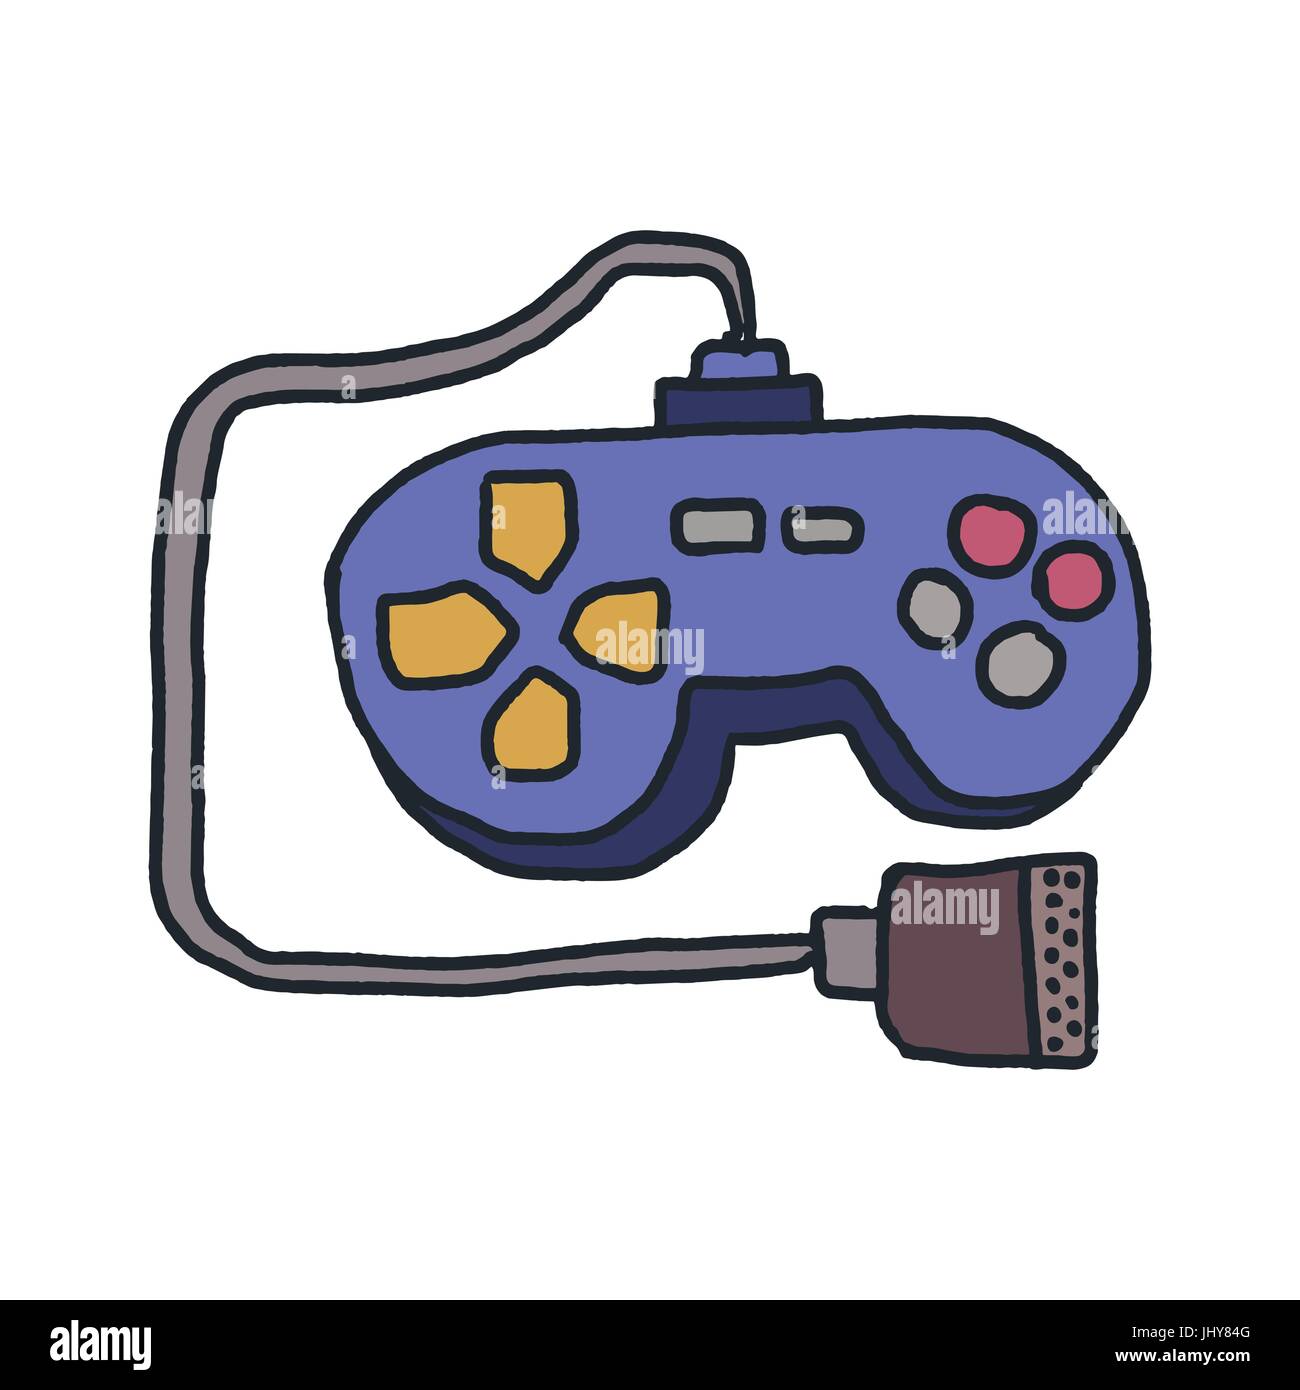 Joystick isolated. Retro gamepad. Video game controller on white background Stock Vector